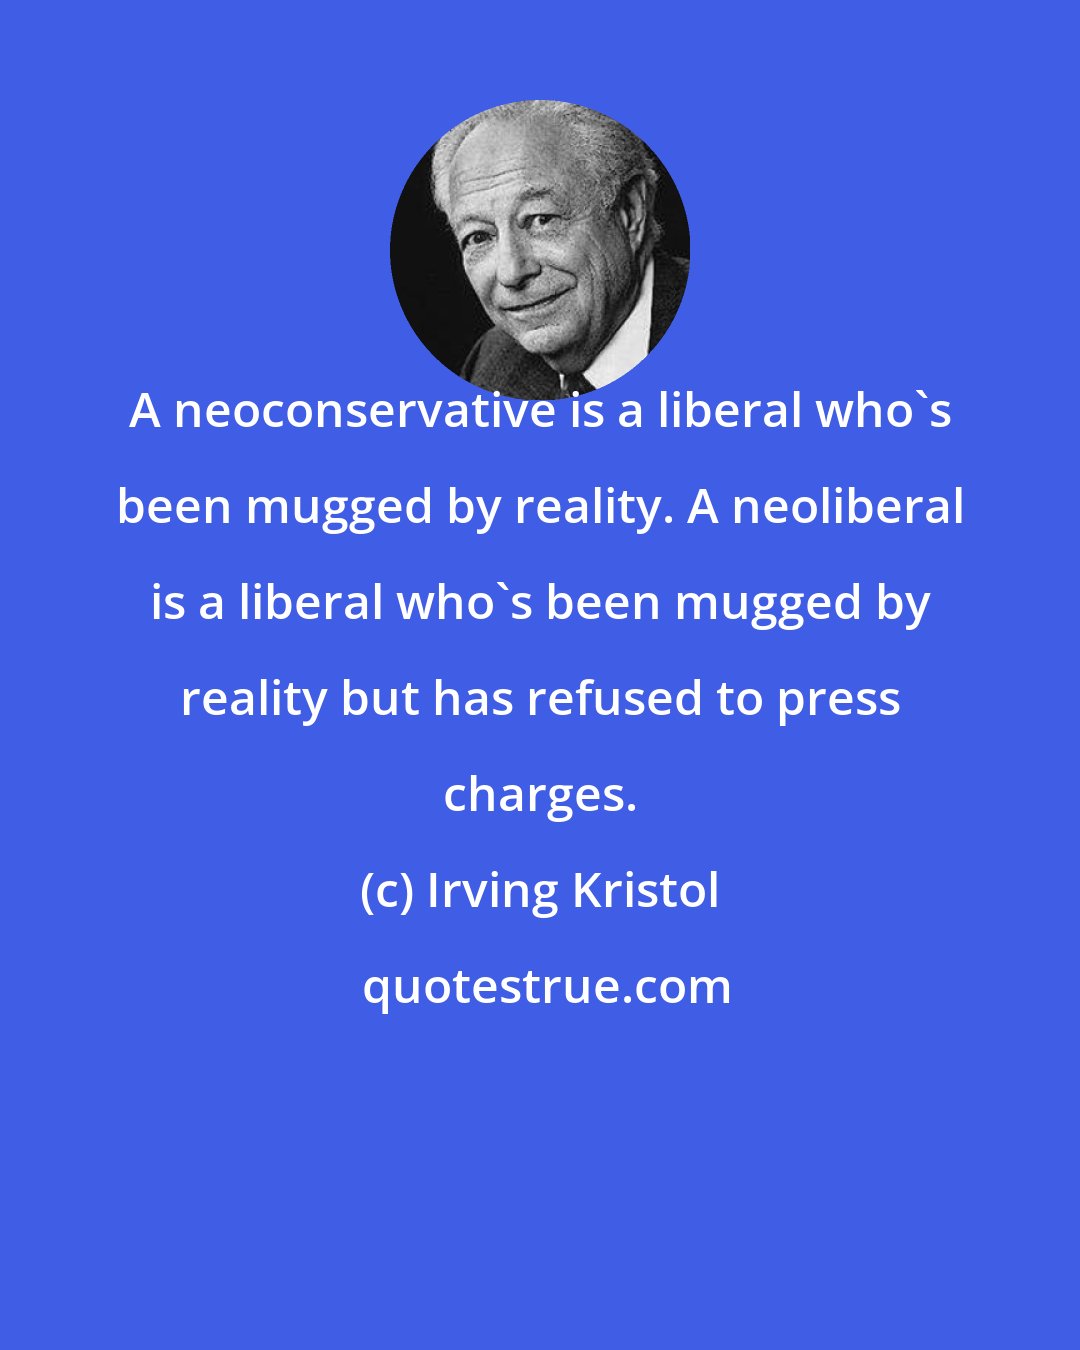 Irving Kristol: A neoconservative is a liberal who's been mugged by reality. A neoliberal is a liberal who's been mugged by reality but has refused to press charges.